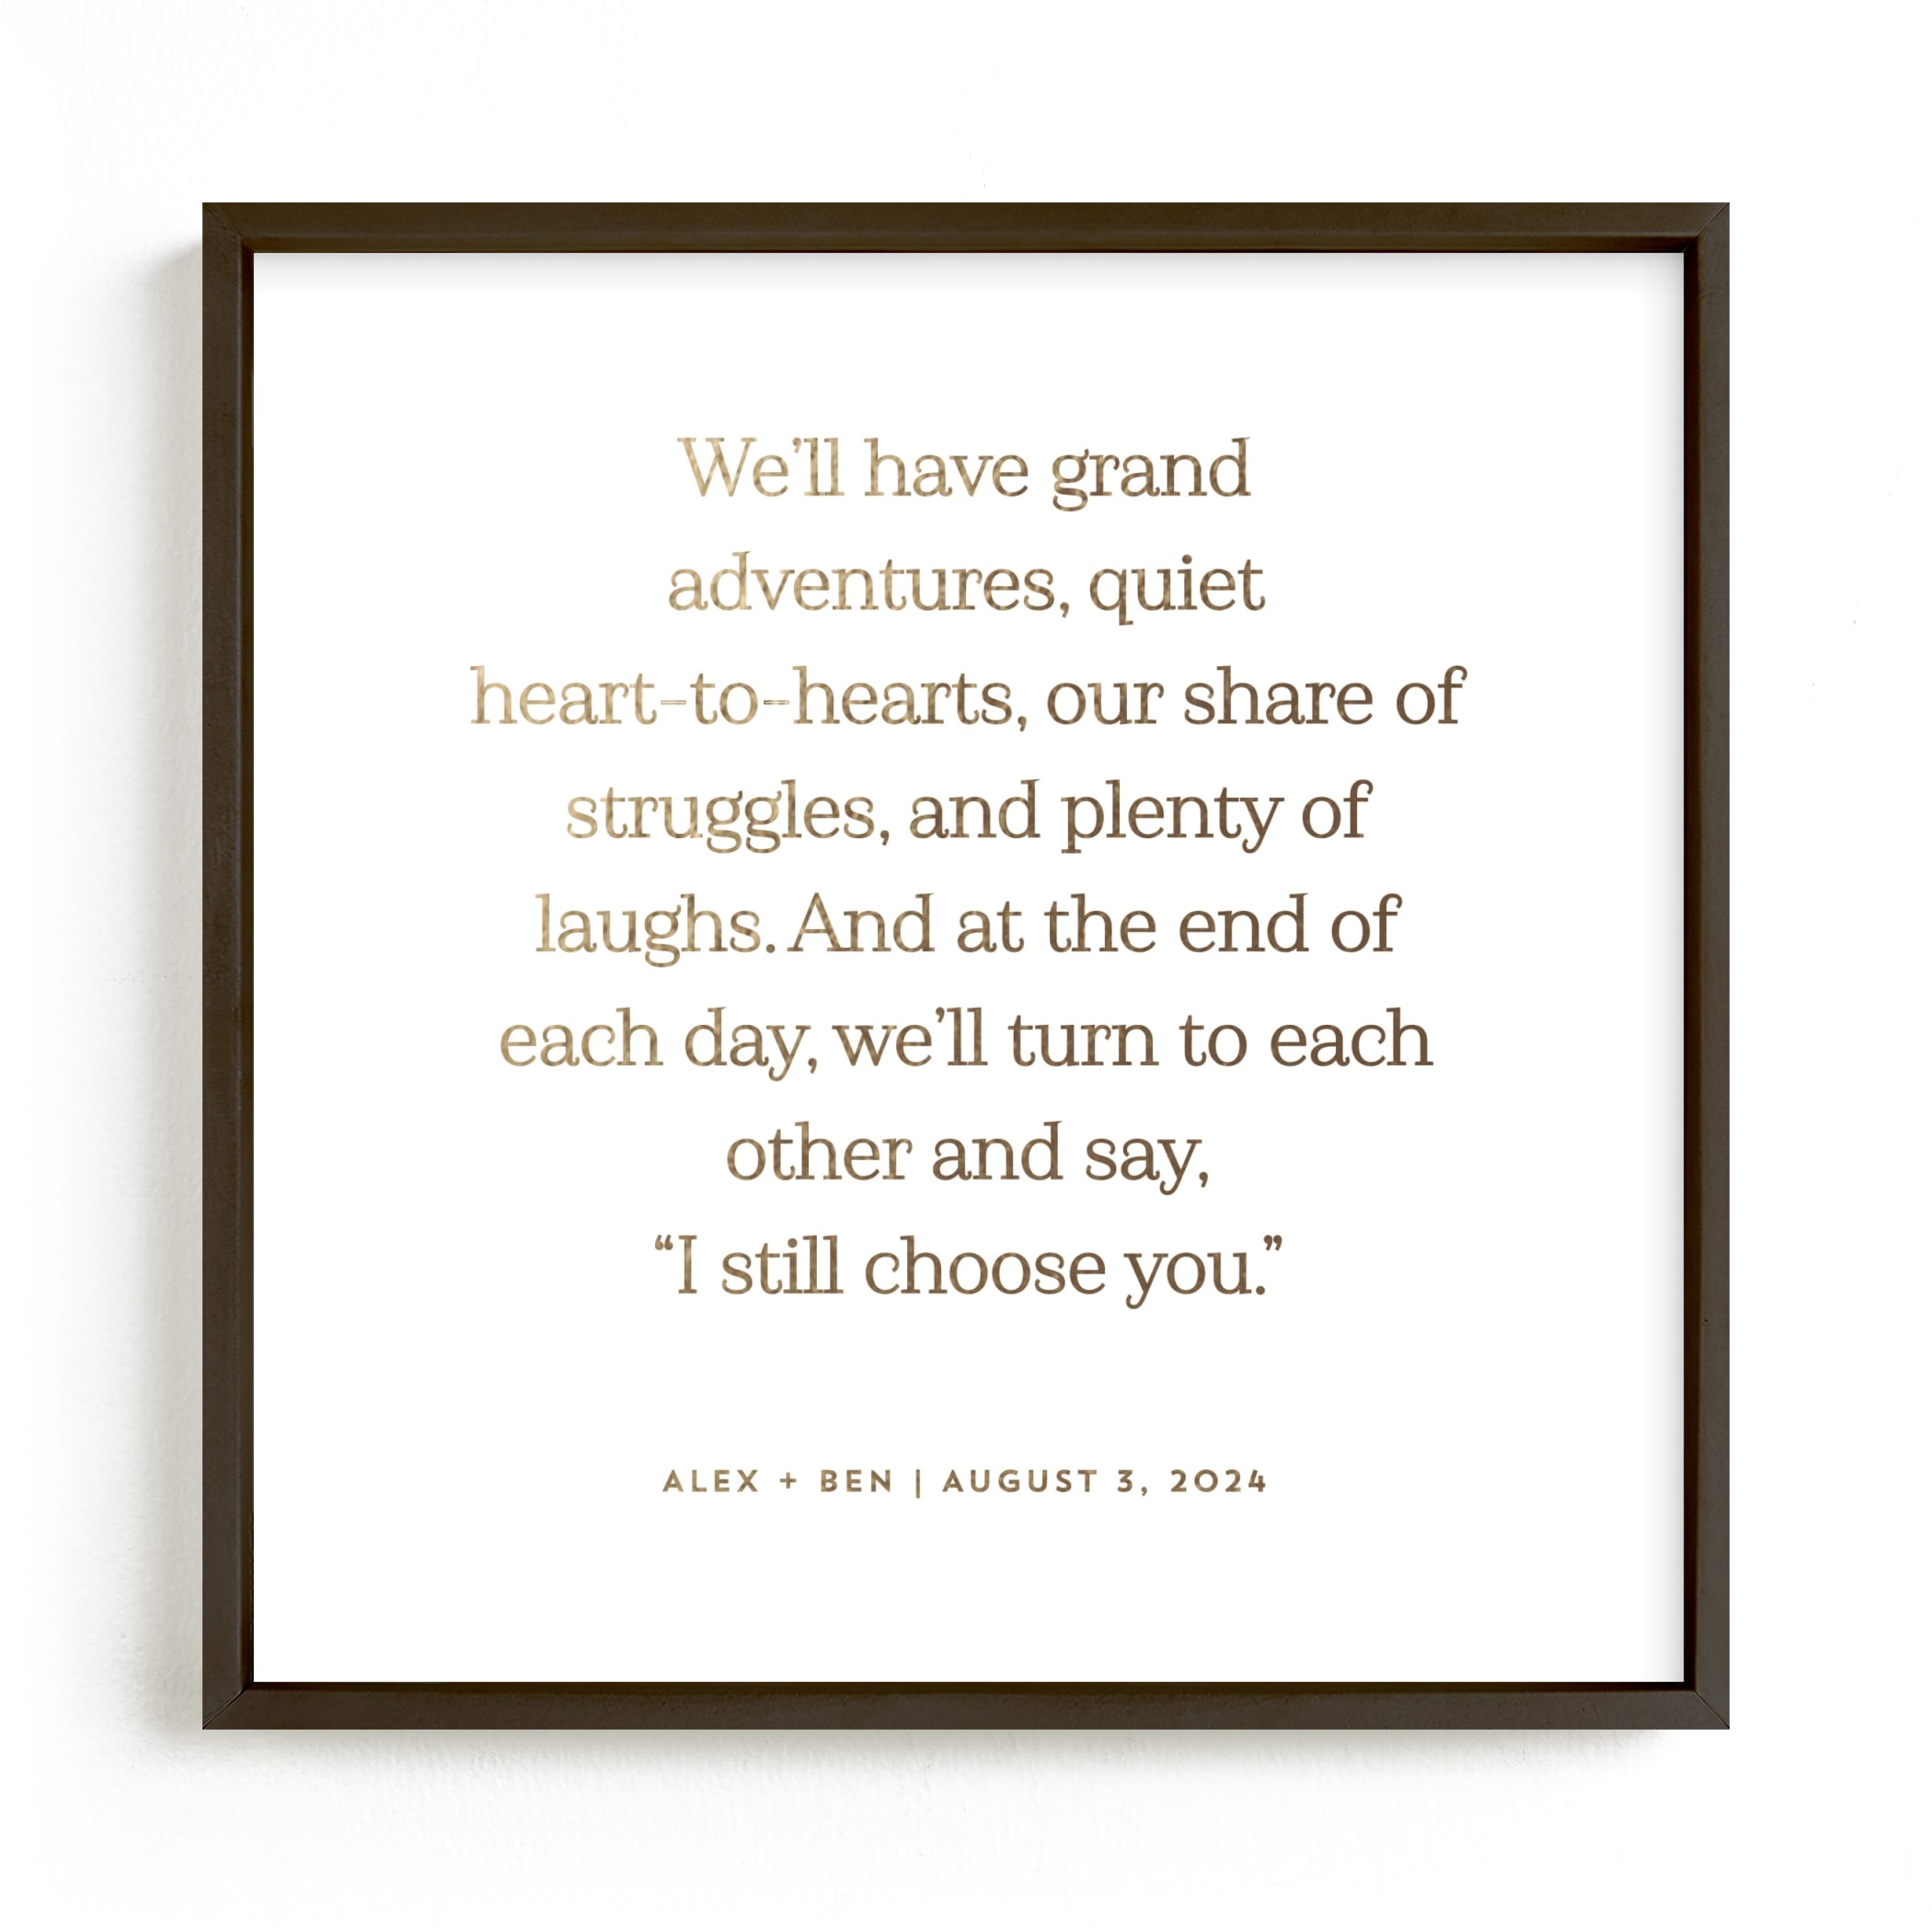 Minted Your Vows as a Foil Art Print in Gold foil with Matte Black frame by Minted